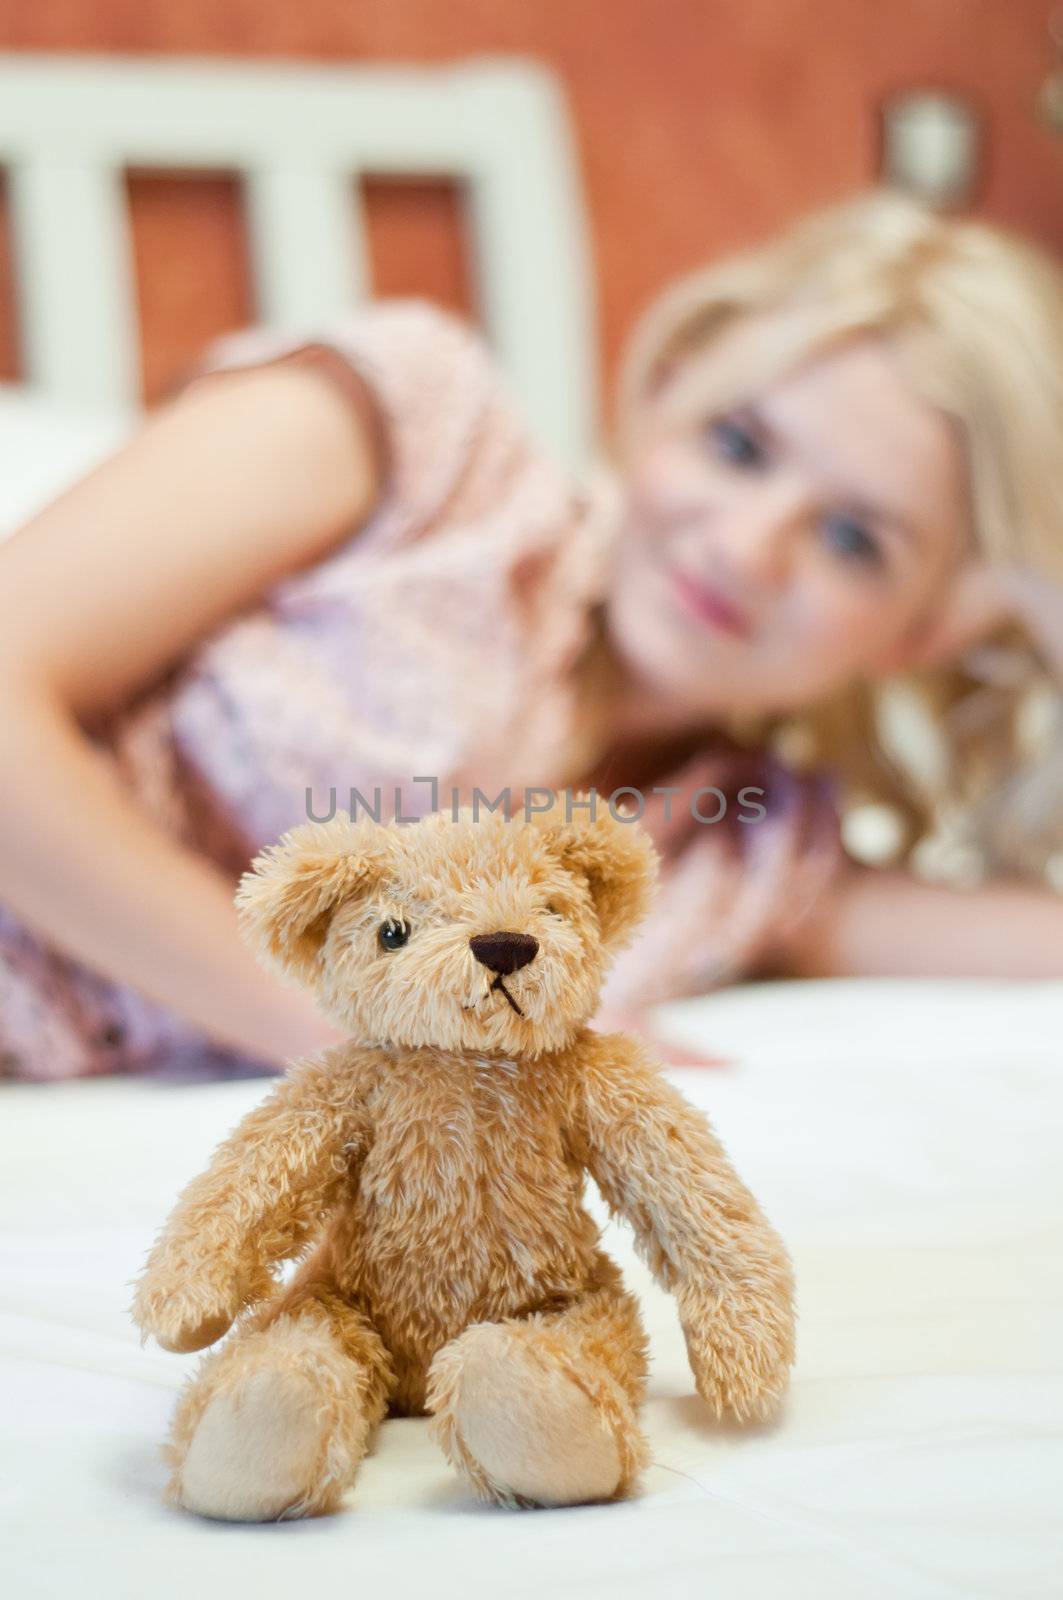 Beautiful young girl with bear toy in bed